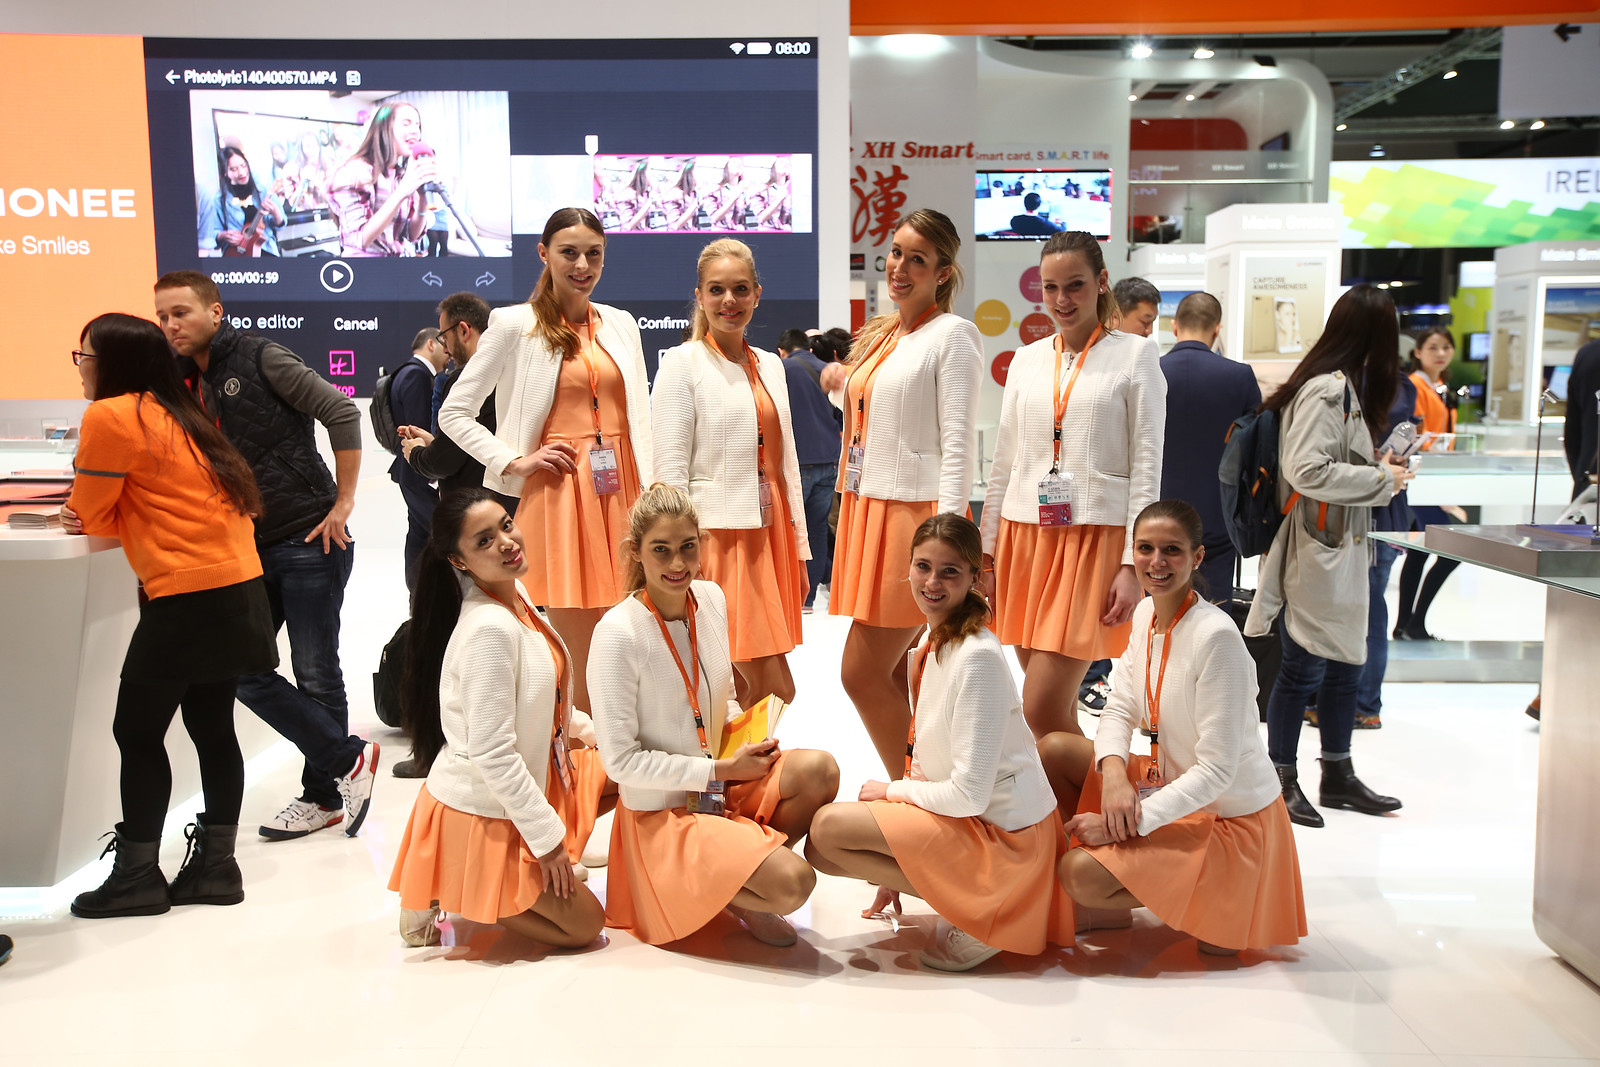 Hostesses at MWC booth during congress dressed with corporate colours